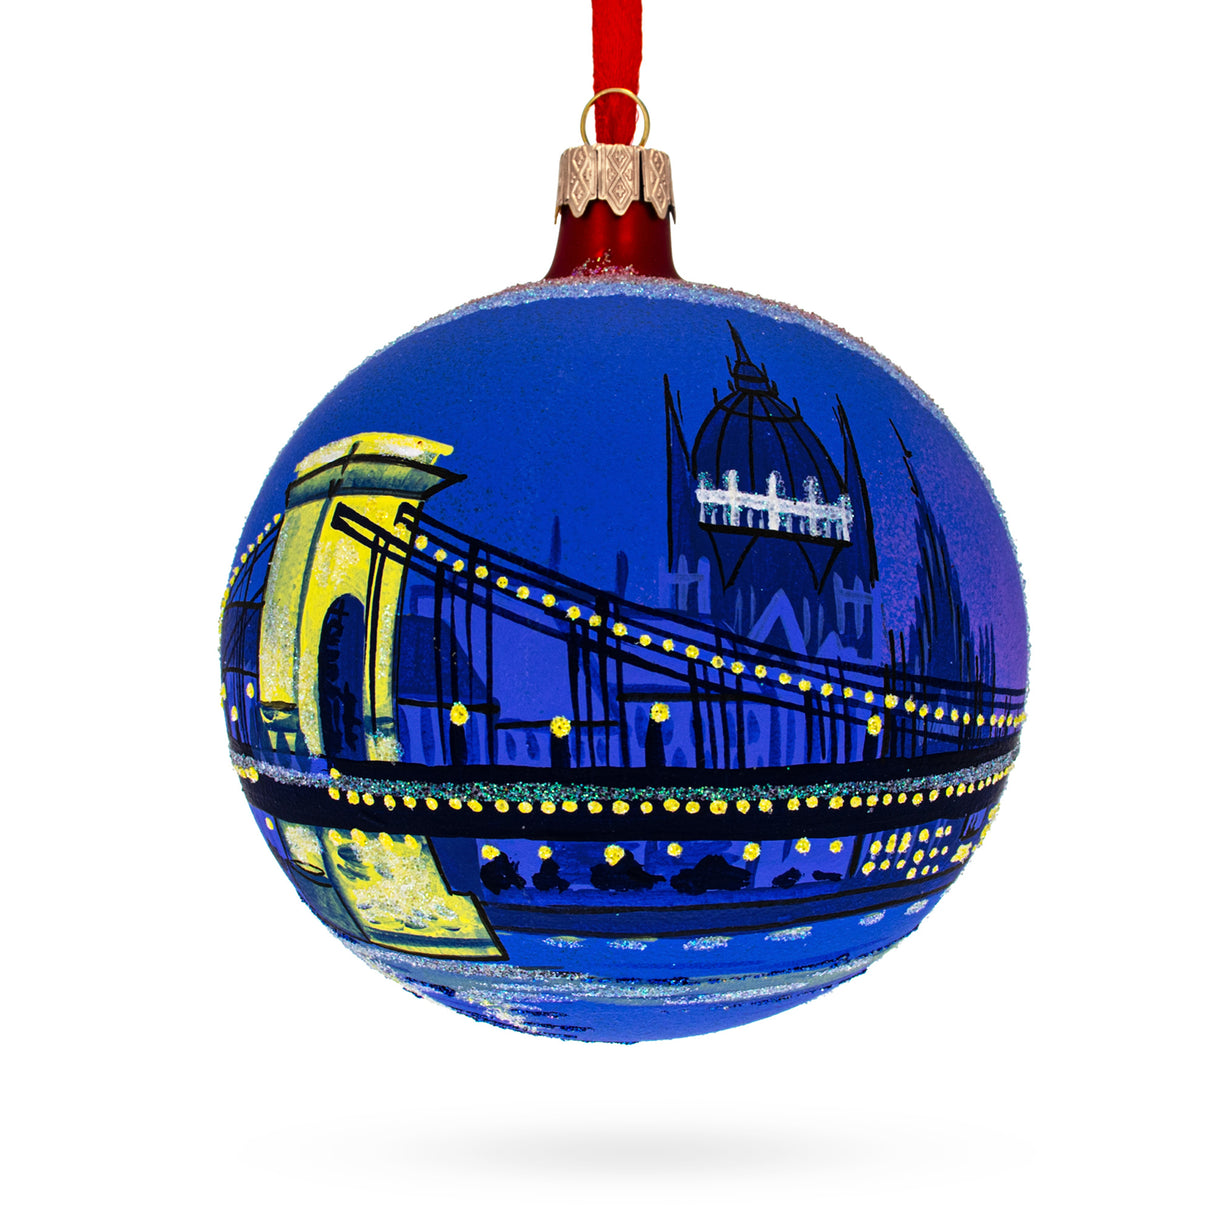 The Széchenyi Chain Bridge, Budapest, Hungary Glass Ball Christmas Ornament 4 Inches in Multi color, Round shape